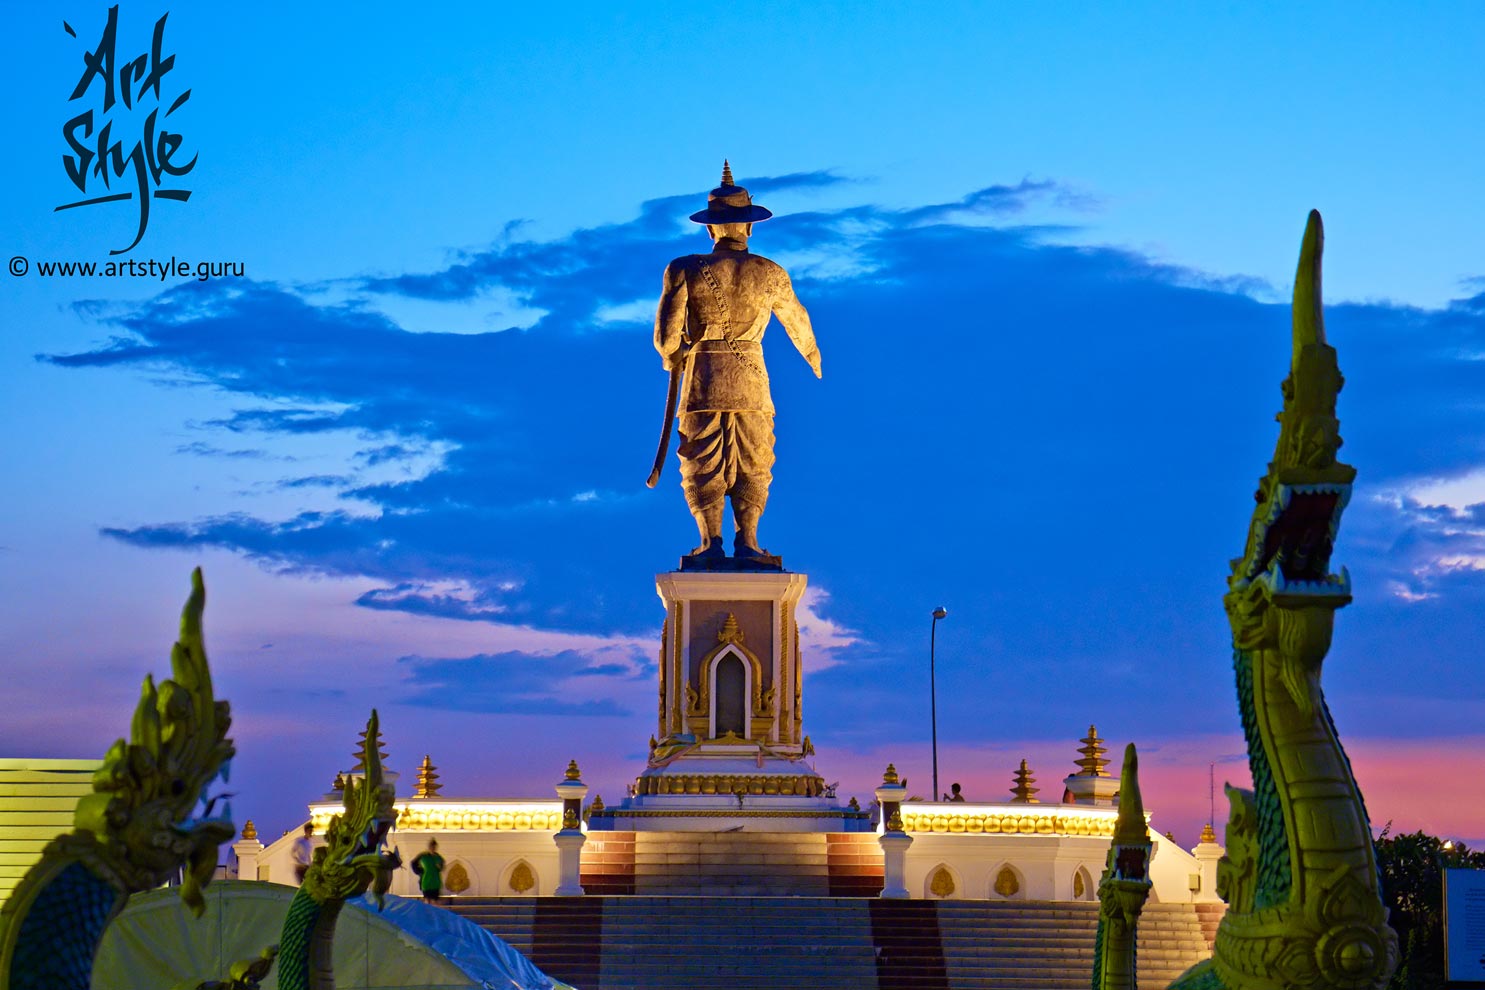 Chao Anouvong, the last monarch of the LaoKingdom of Vientiane